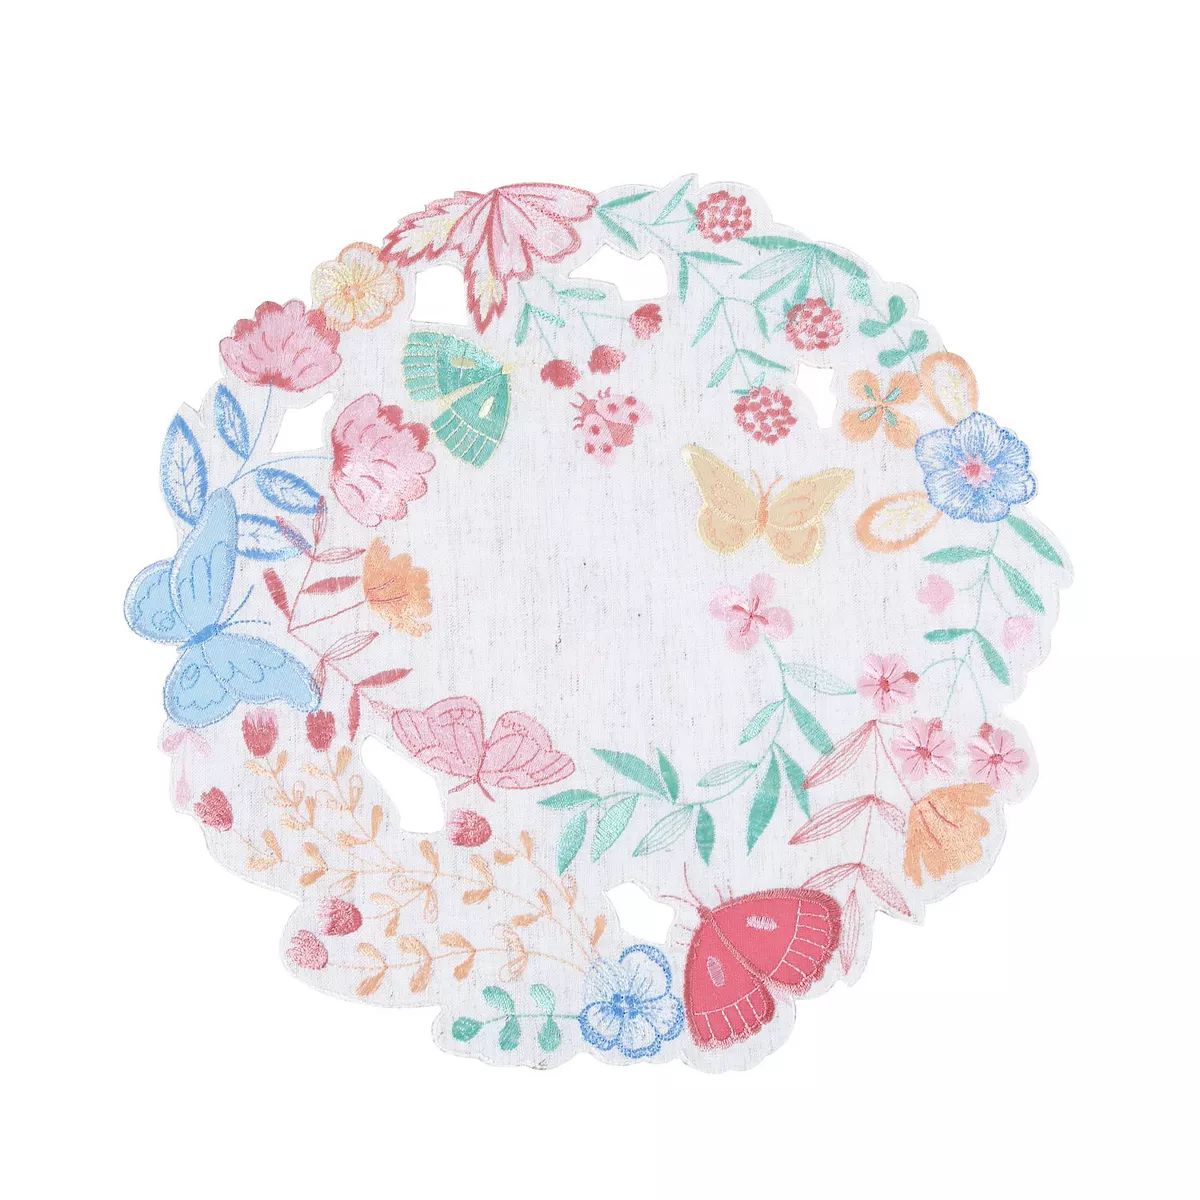 Celebrate Together™ Spring Cutout Placemat | Kohl's